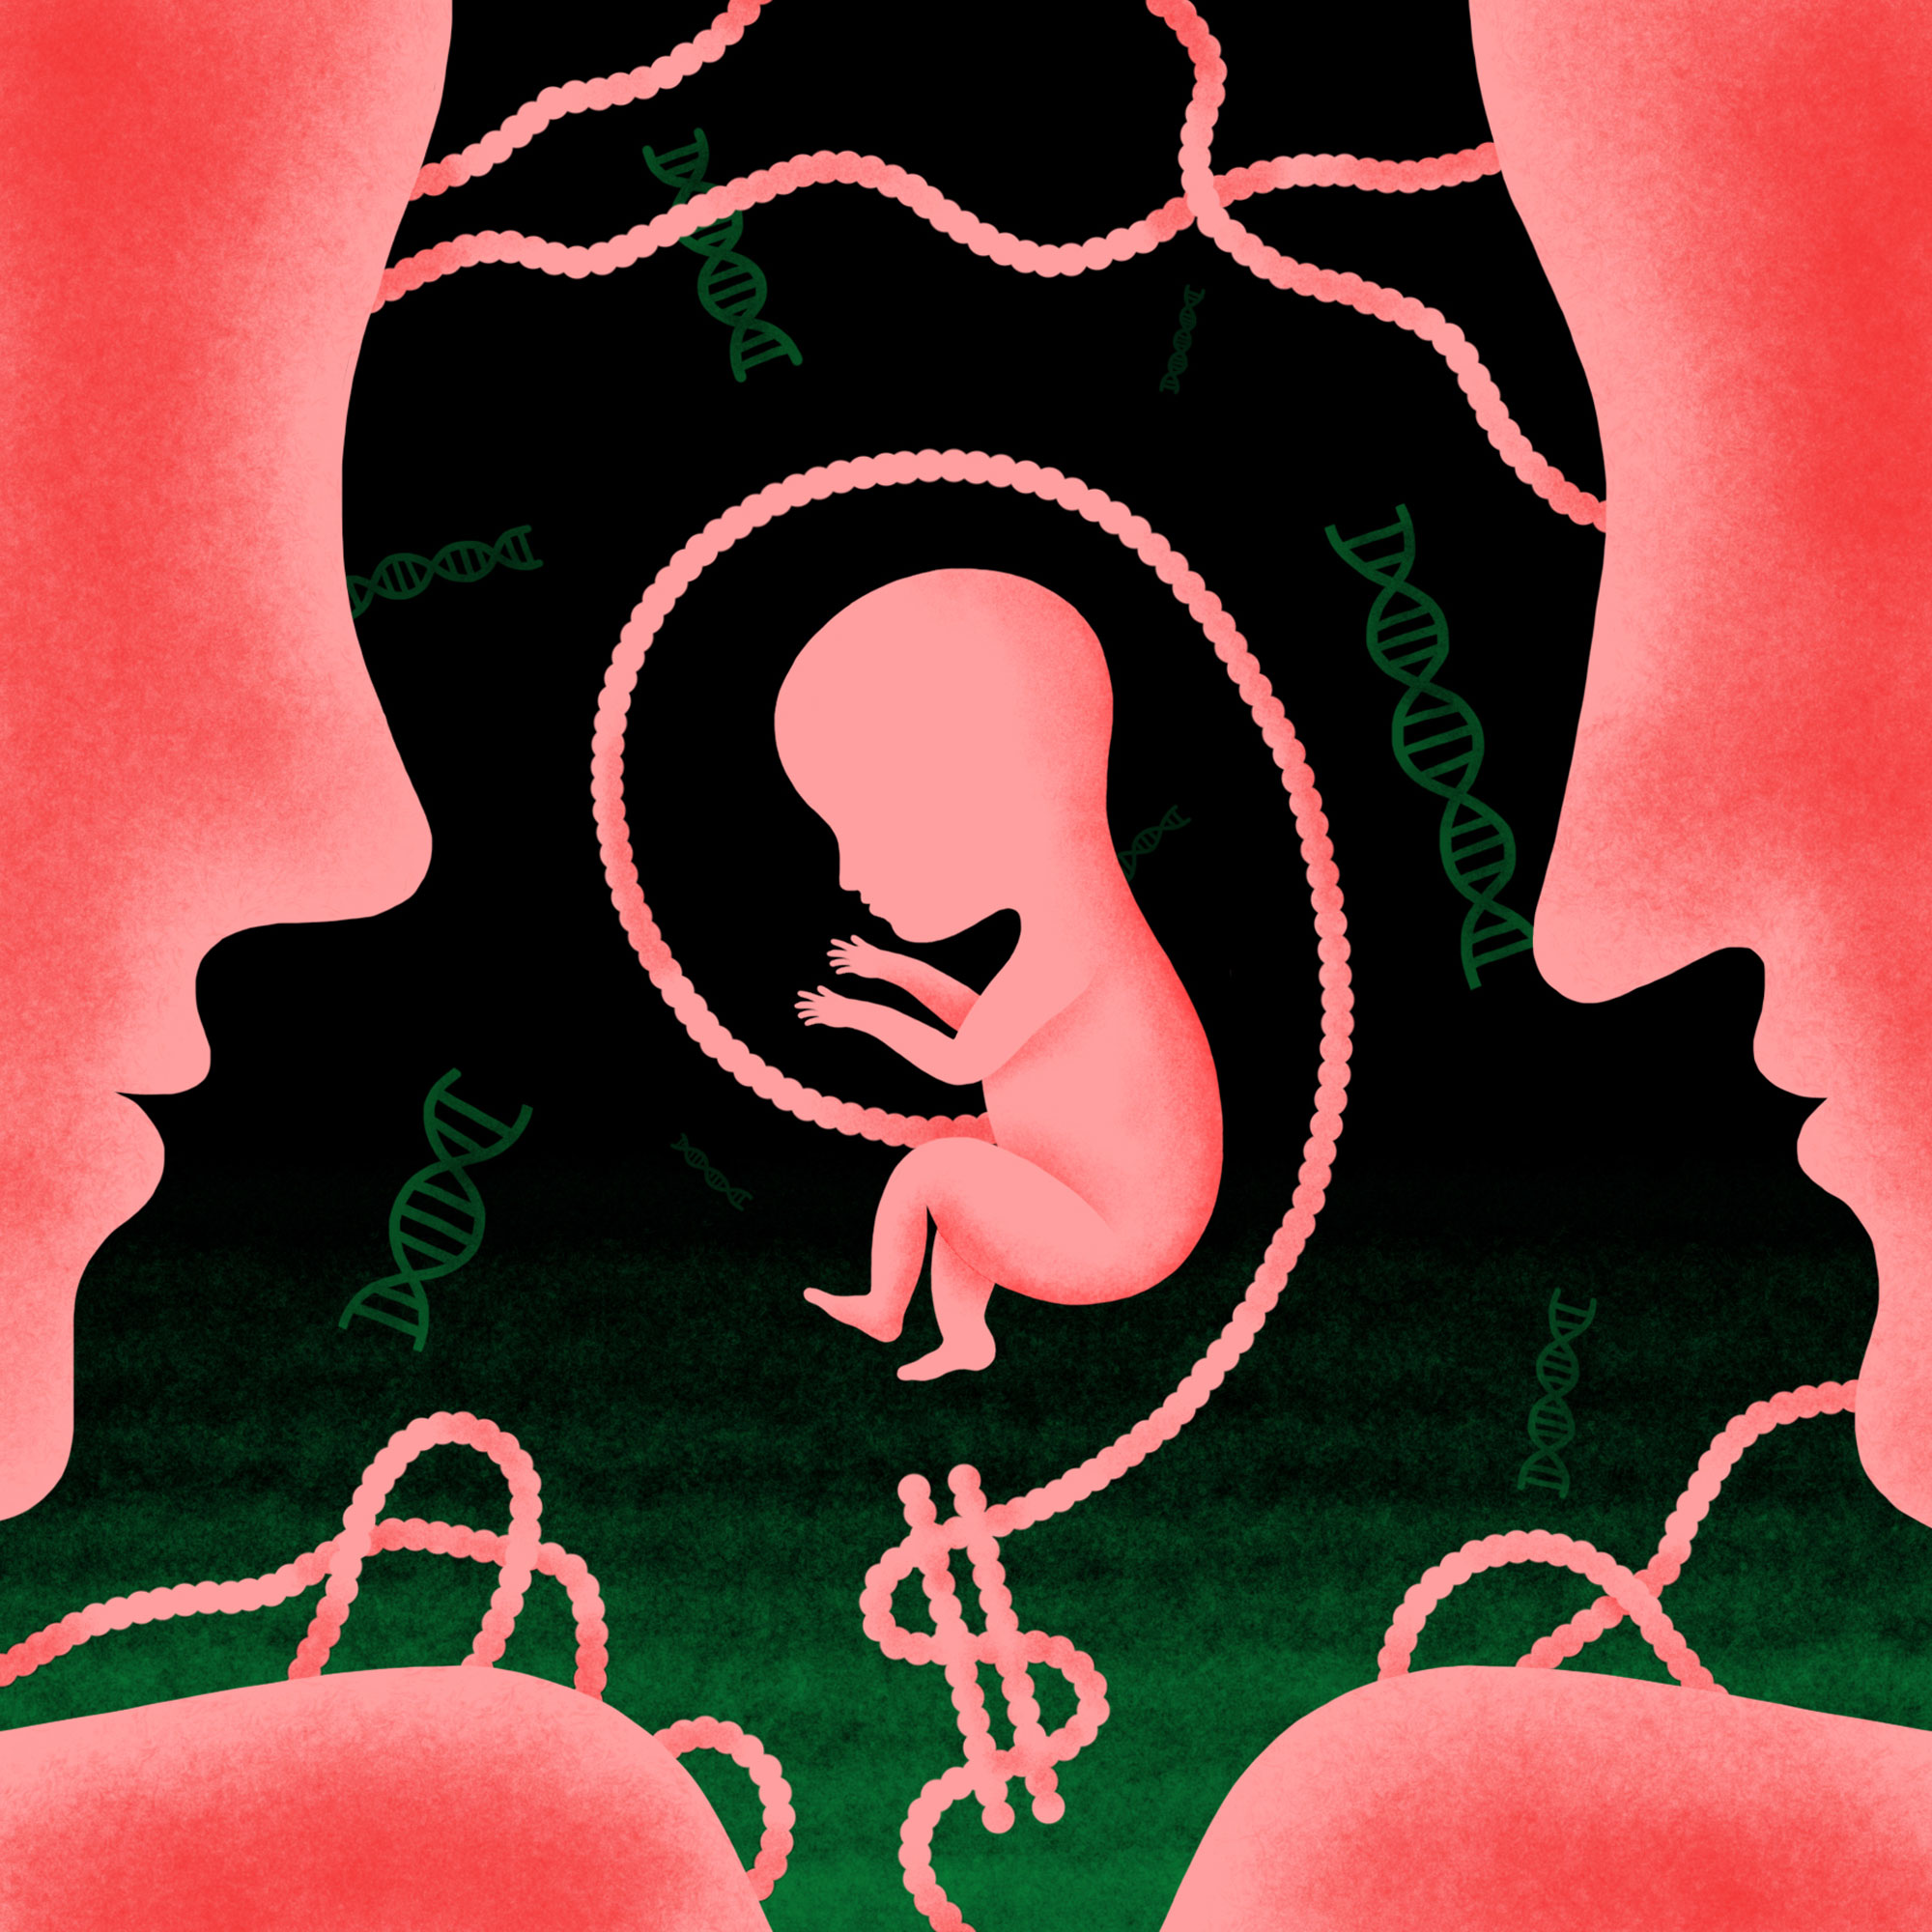 Illustration of a fetus between the profiles of a man and a woman. The umbilical cord is forming a dollar sign.